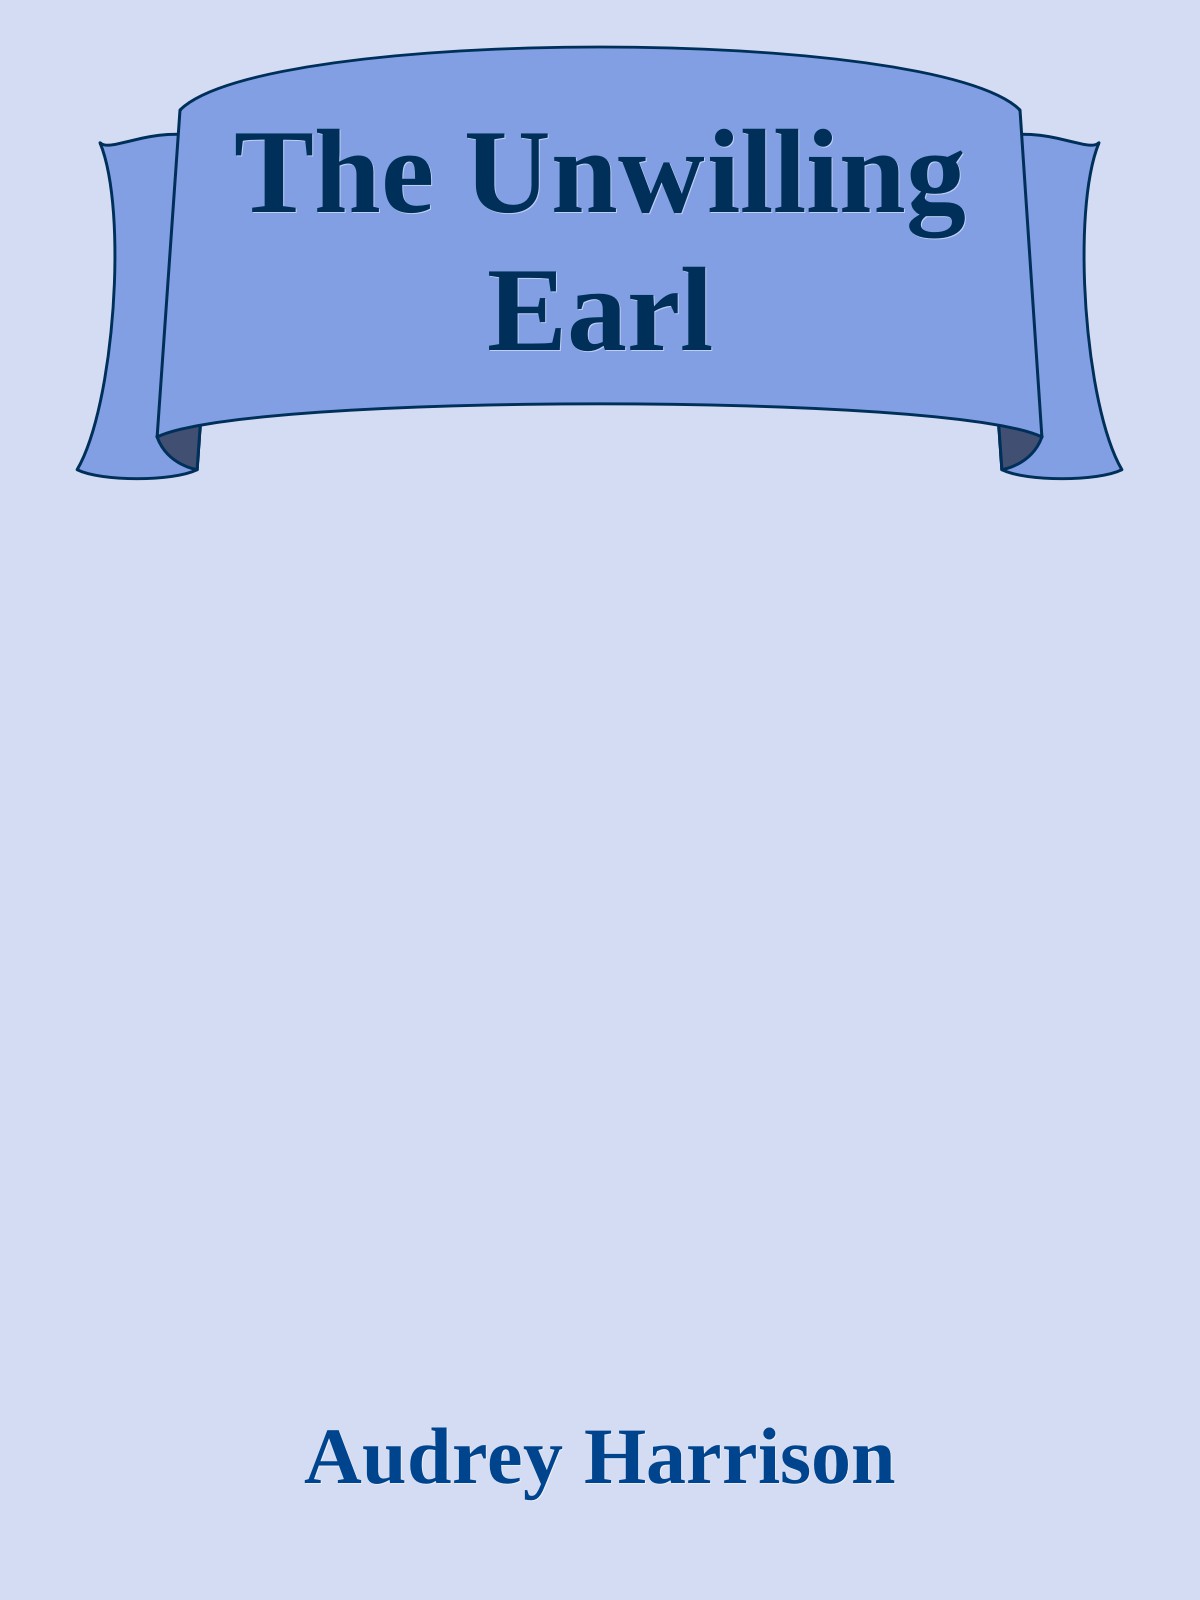 The Unwilling Earl by Audrey Harrison